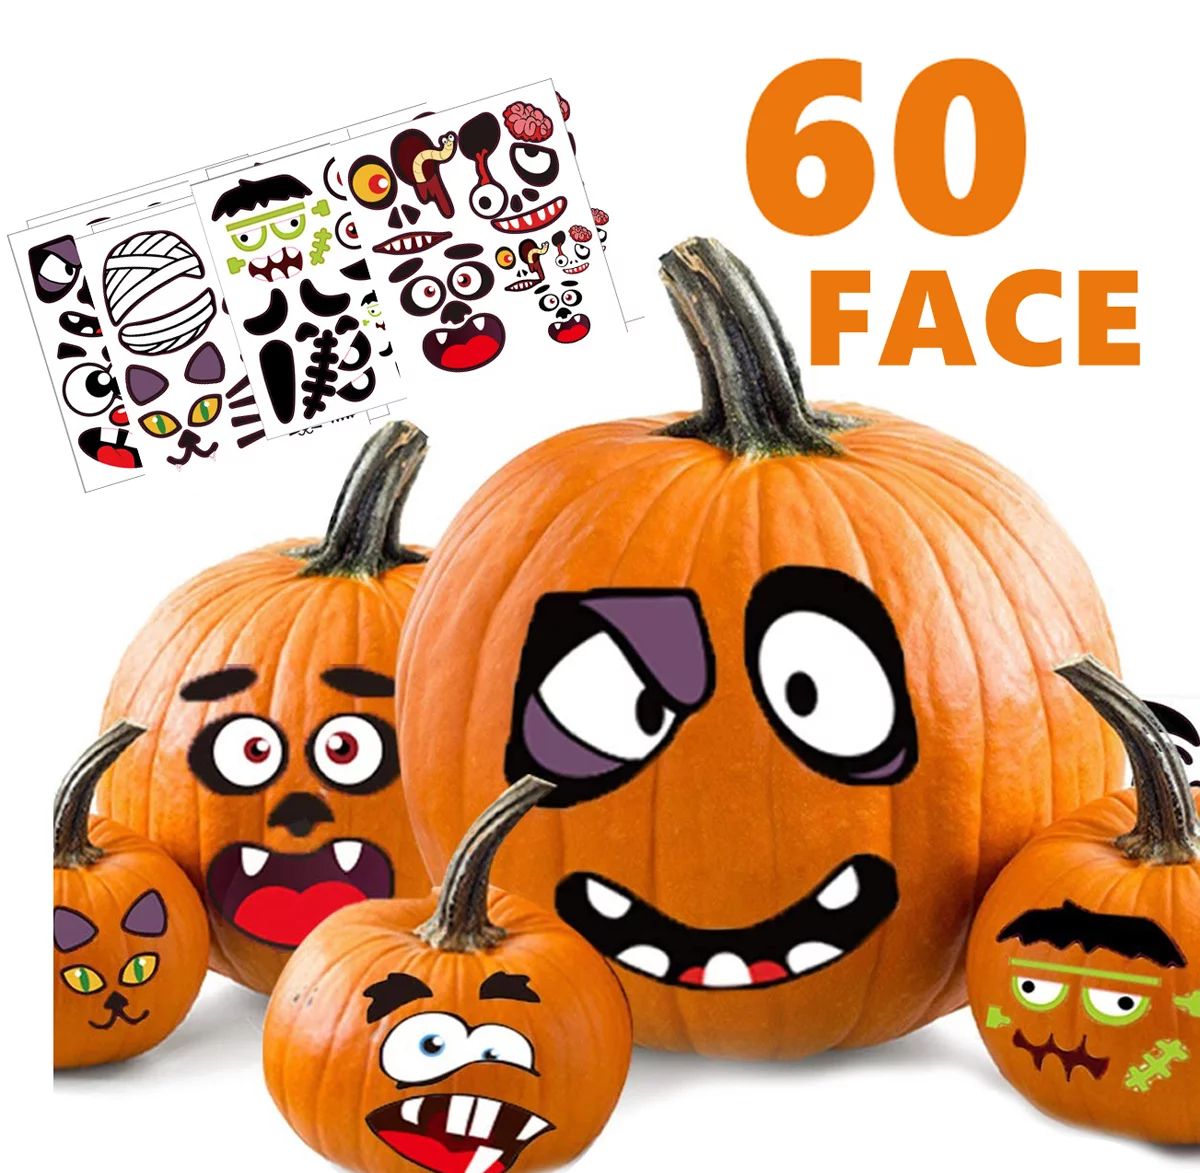 Pumpkin Decorating Halloween Stickers for Kids - Make 60 Funny Face and Classic Pumpkin Expressio... | Walmart (US)